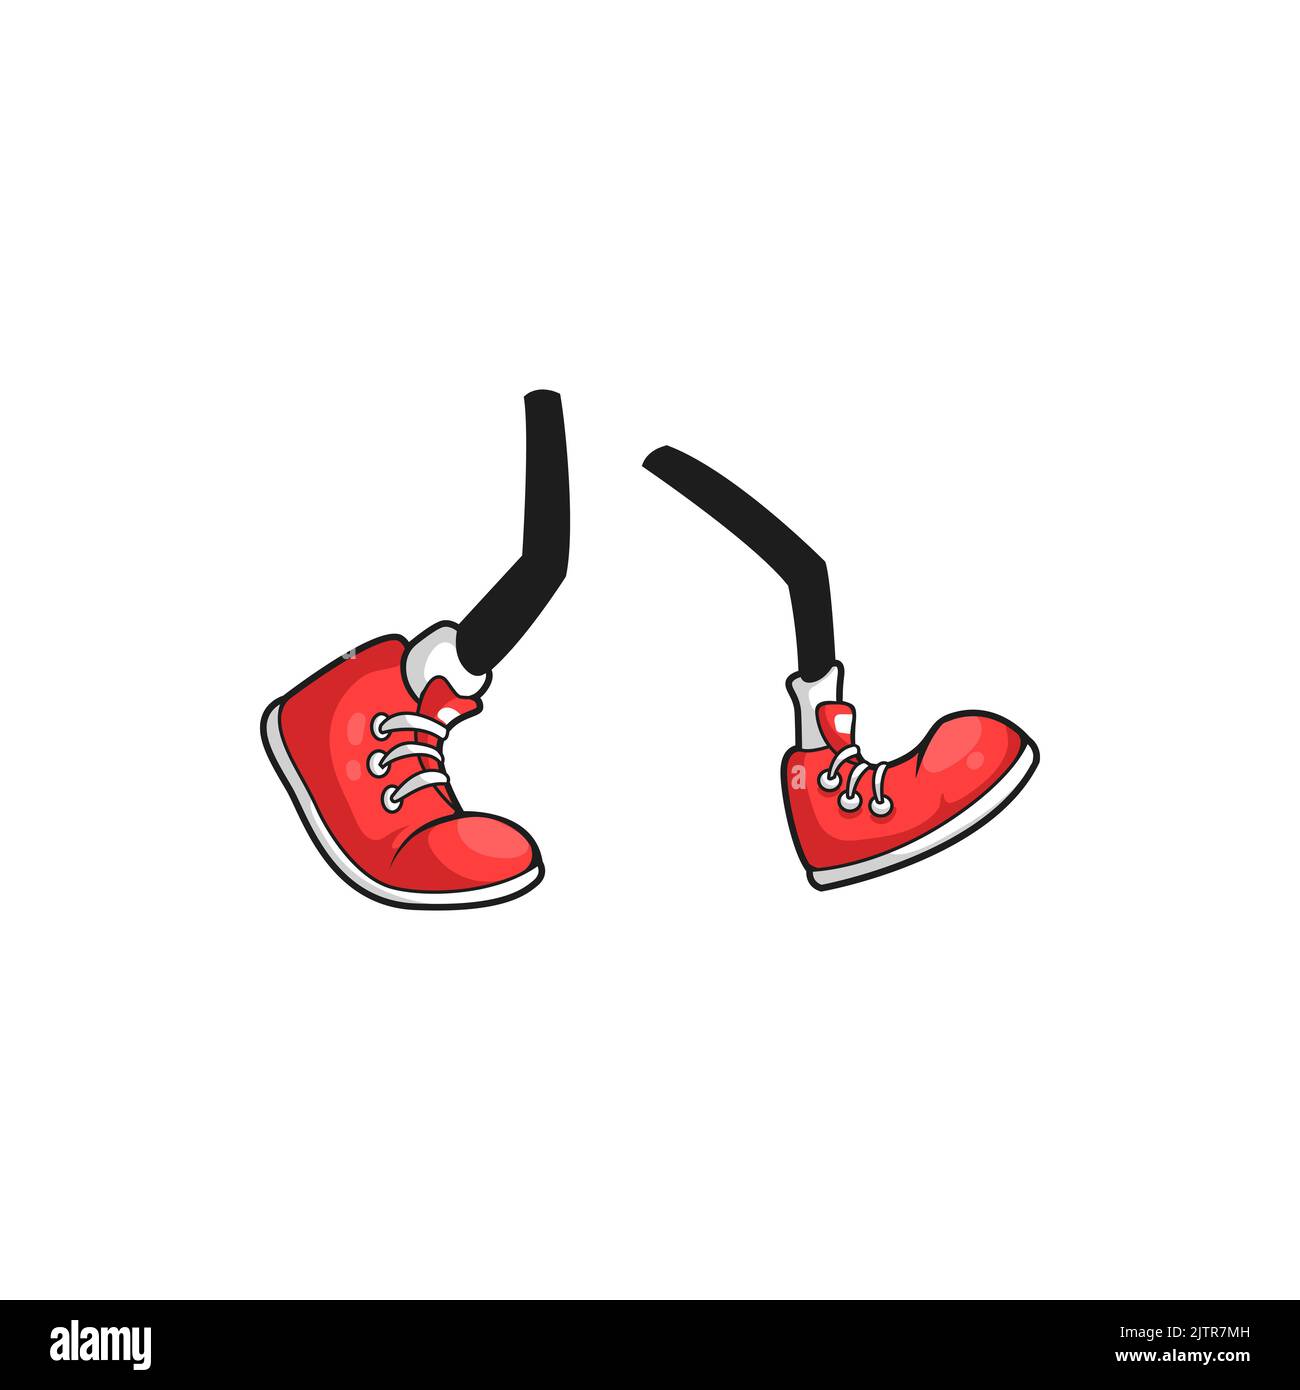 Feet In Sneakers Female And Male Walking Legs In Sport Shoes With Socks  Pants And Jeans Trendy Fashion Fitness Footwear Vector Concept Stock  Illustration - Download Image Now - iStock